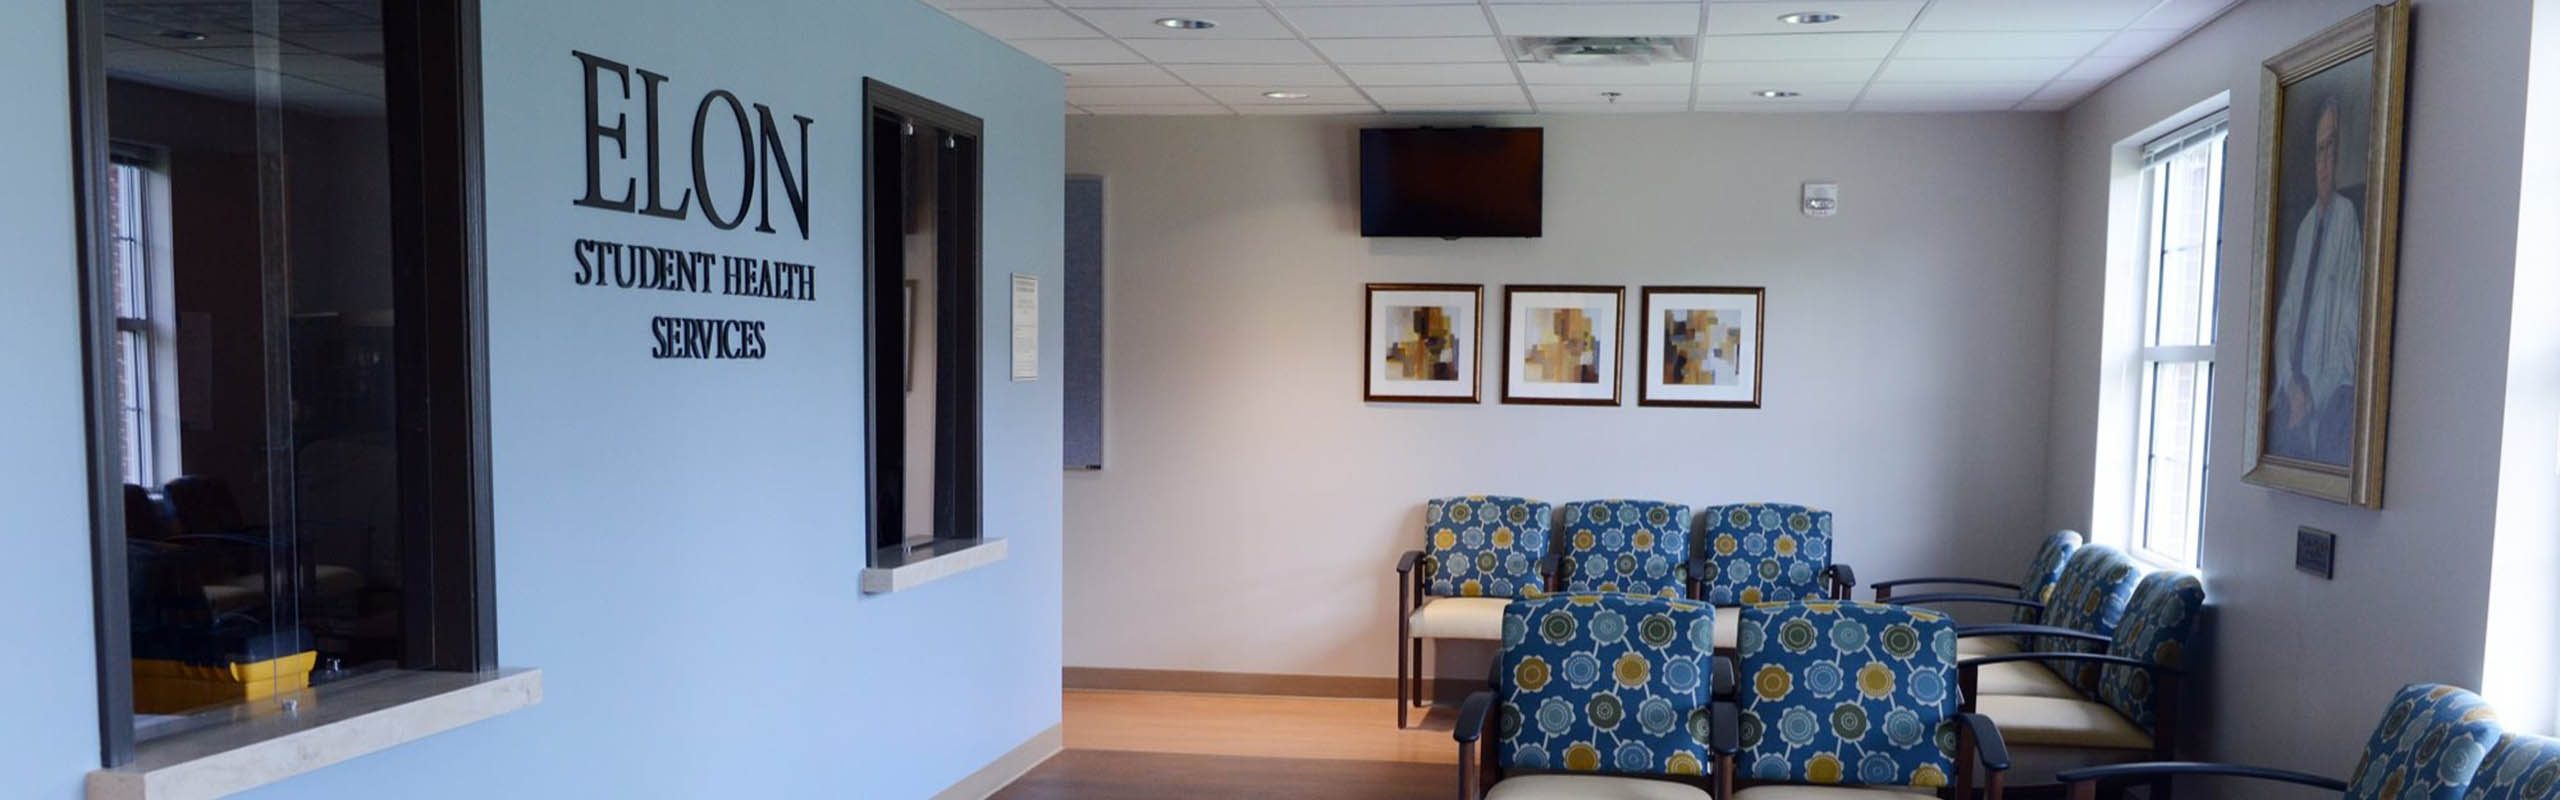 Student Health Services waiting area.